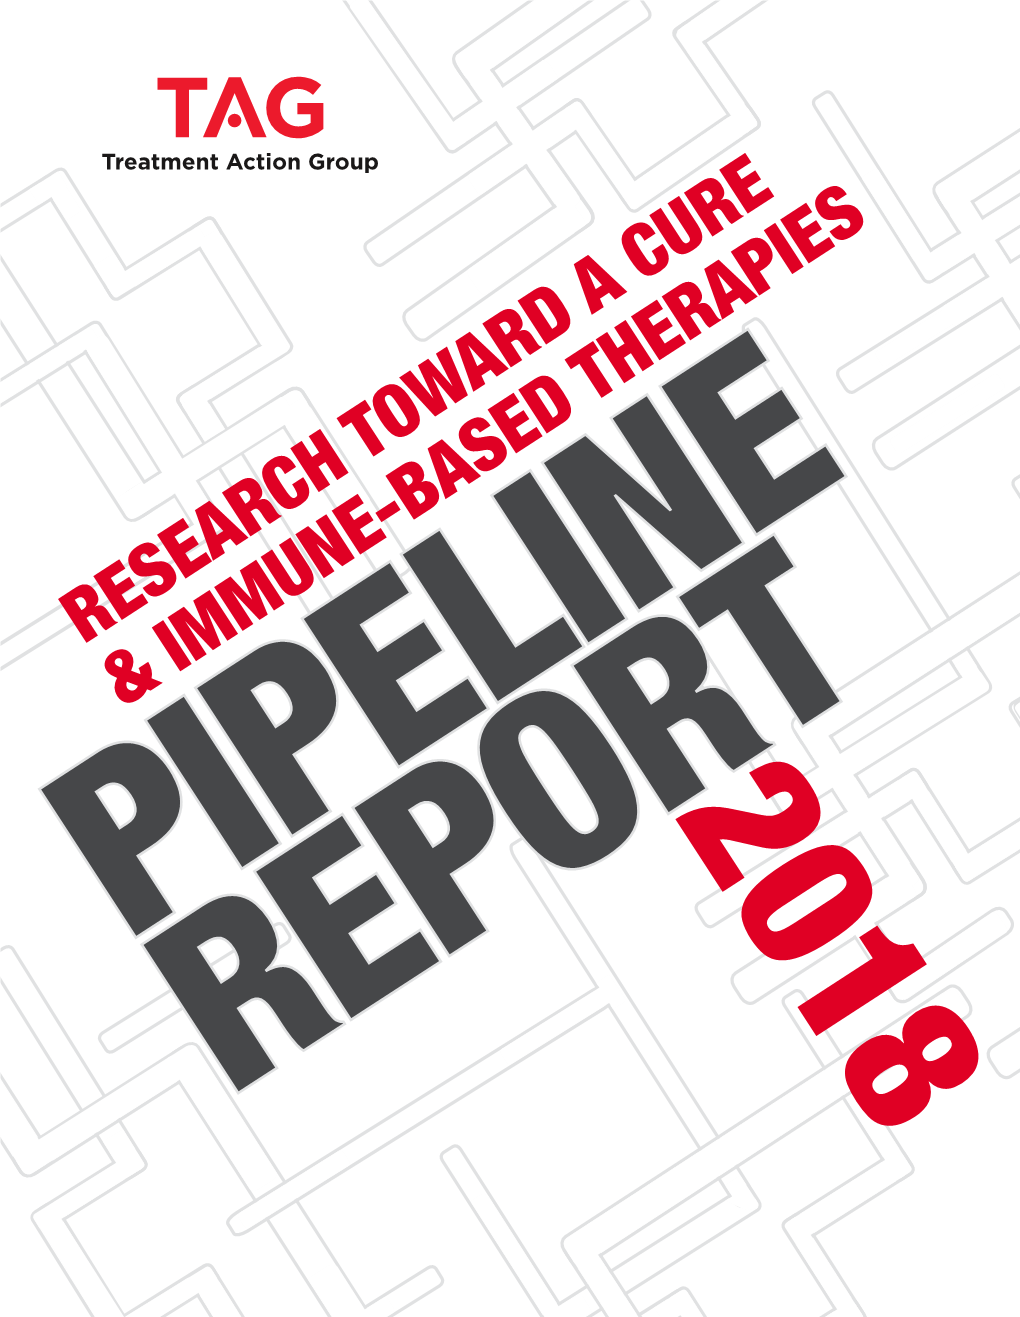 The Research Toward a Cure and Immune-Based Therapies Pipeline